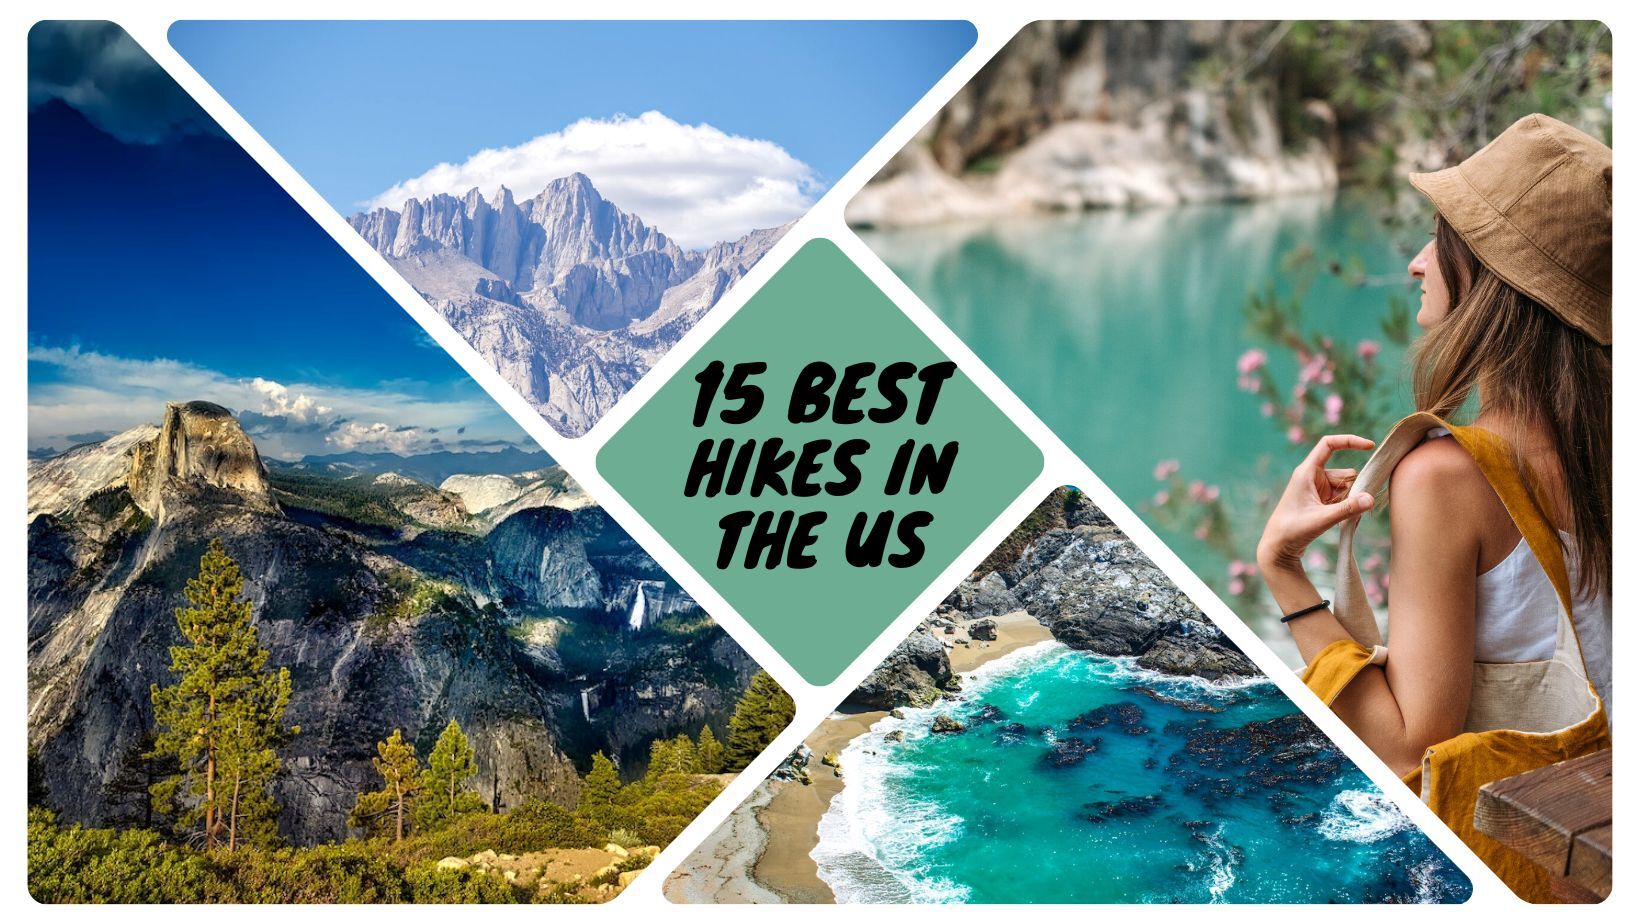 15 Best Hikes in the US